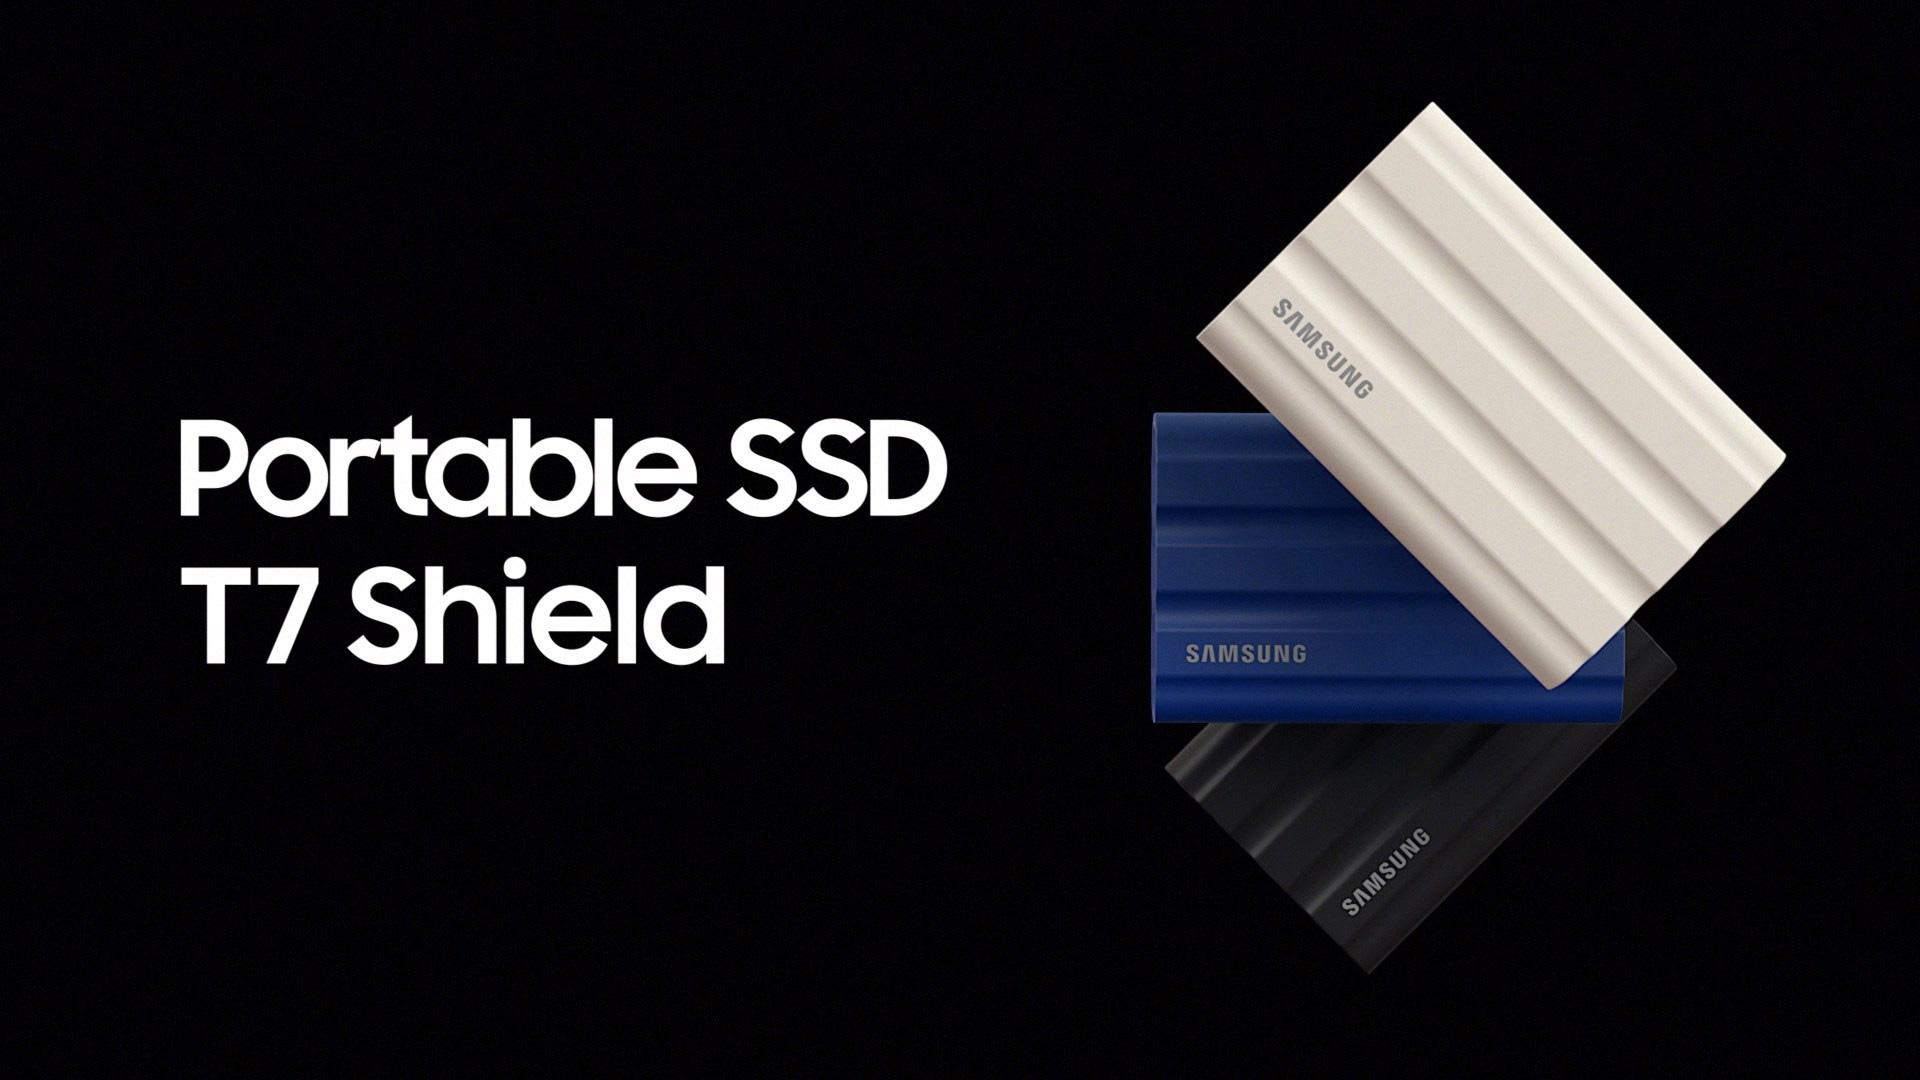  Samsung T7 Shield: 2TB portable storage in credit card size